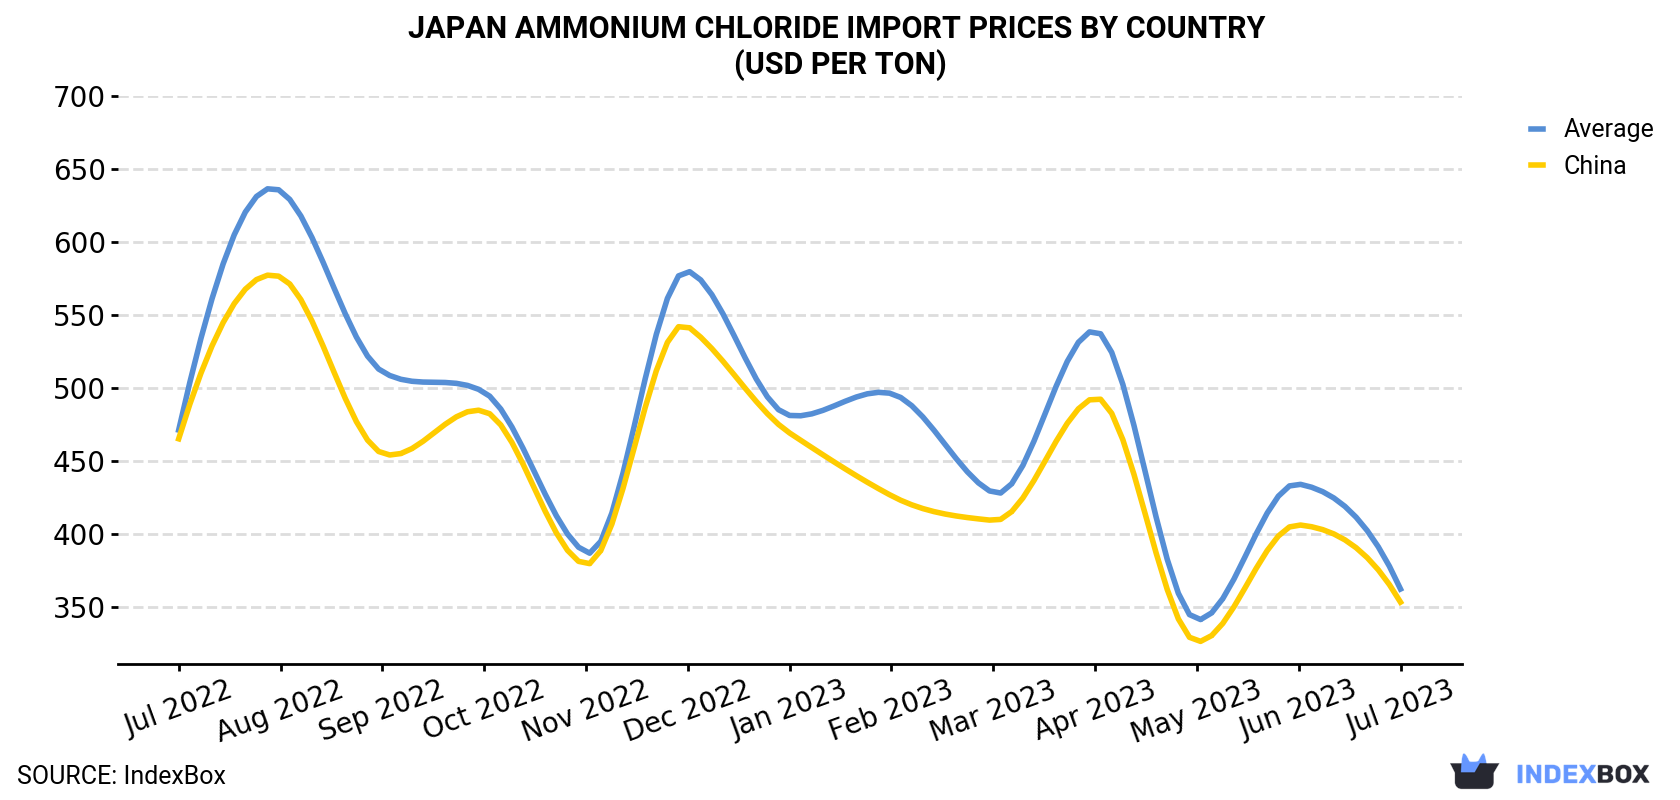 Japan Ammonium Chloride Import Prices By Country (USD Per Ton)